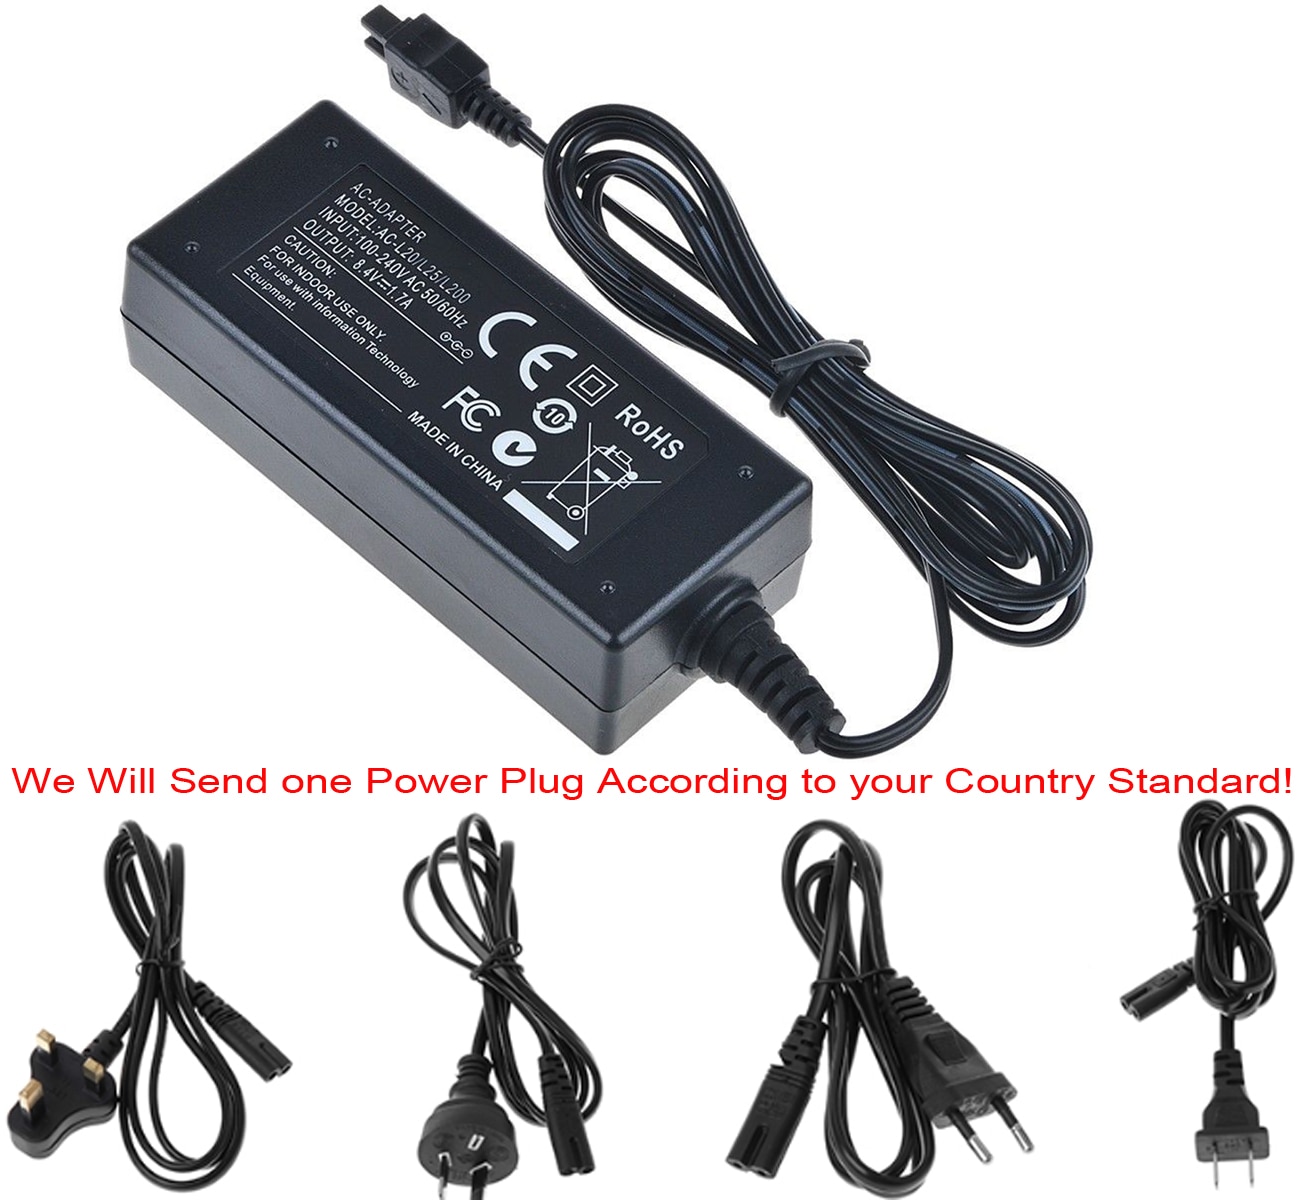 Ac Power Adapter Oplader Voor Sony FDR-AX30, FDR-AX33, FDR-AX40, FDR-AX45, FDR-AX53, FDR-AX55, FDR-AX60 4K Handycam Camcorder